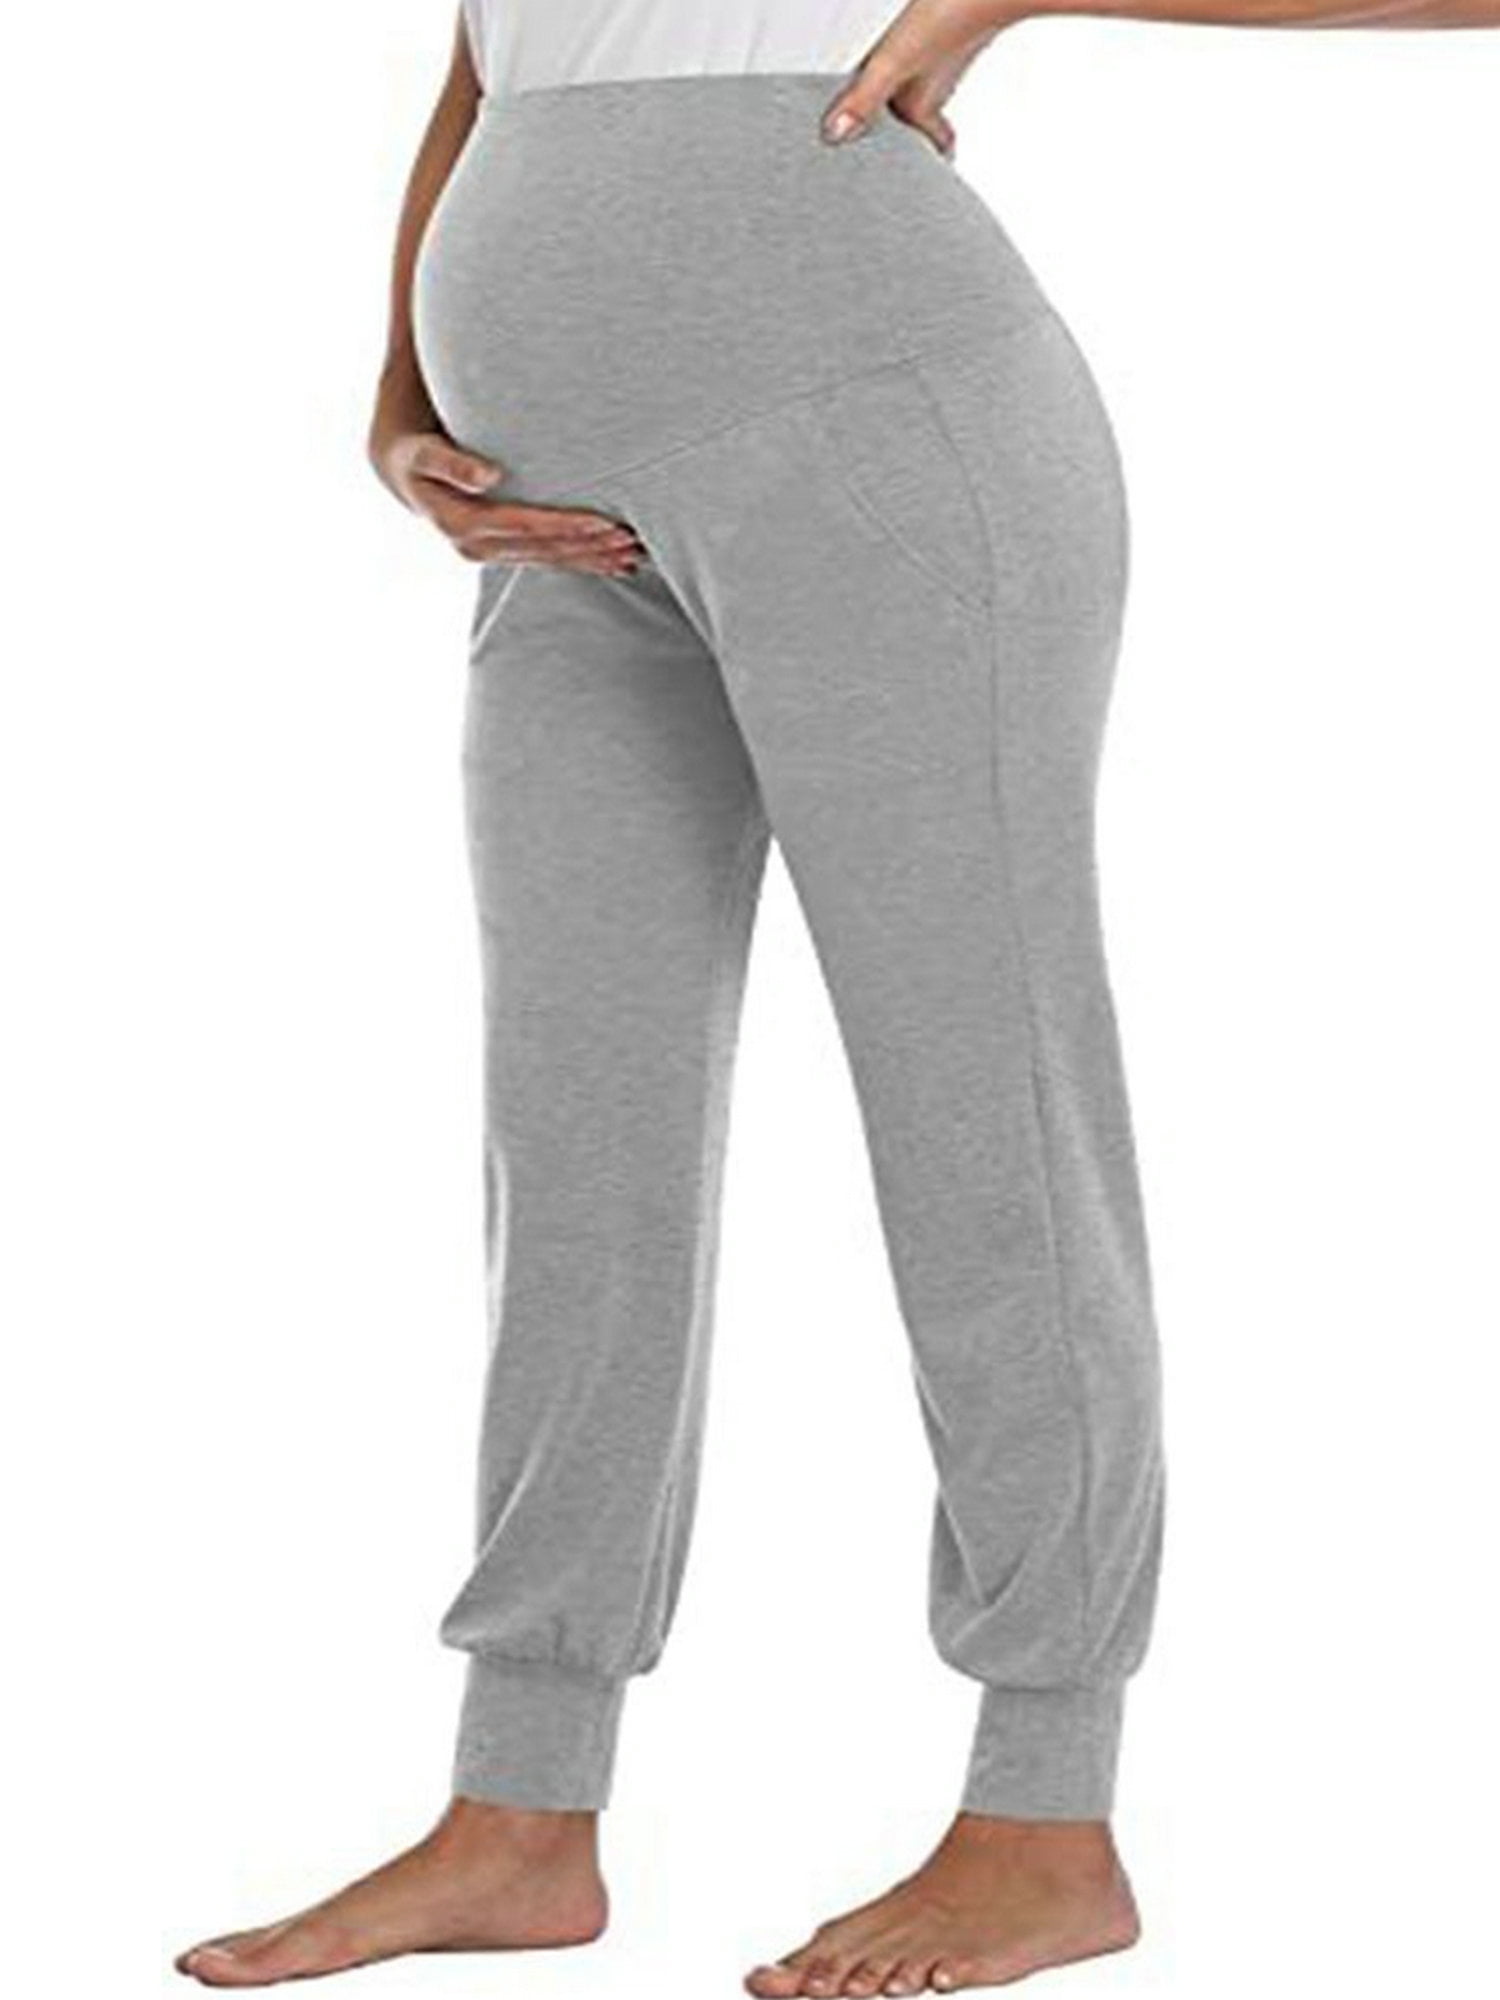 skpabo Maternity Pregnancy Over Bump Support Joggers Comfortable Trousers  for Pregnant Women 